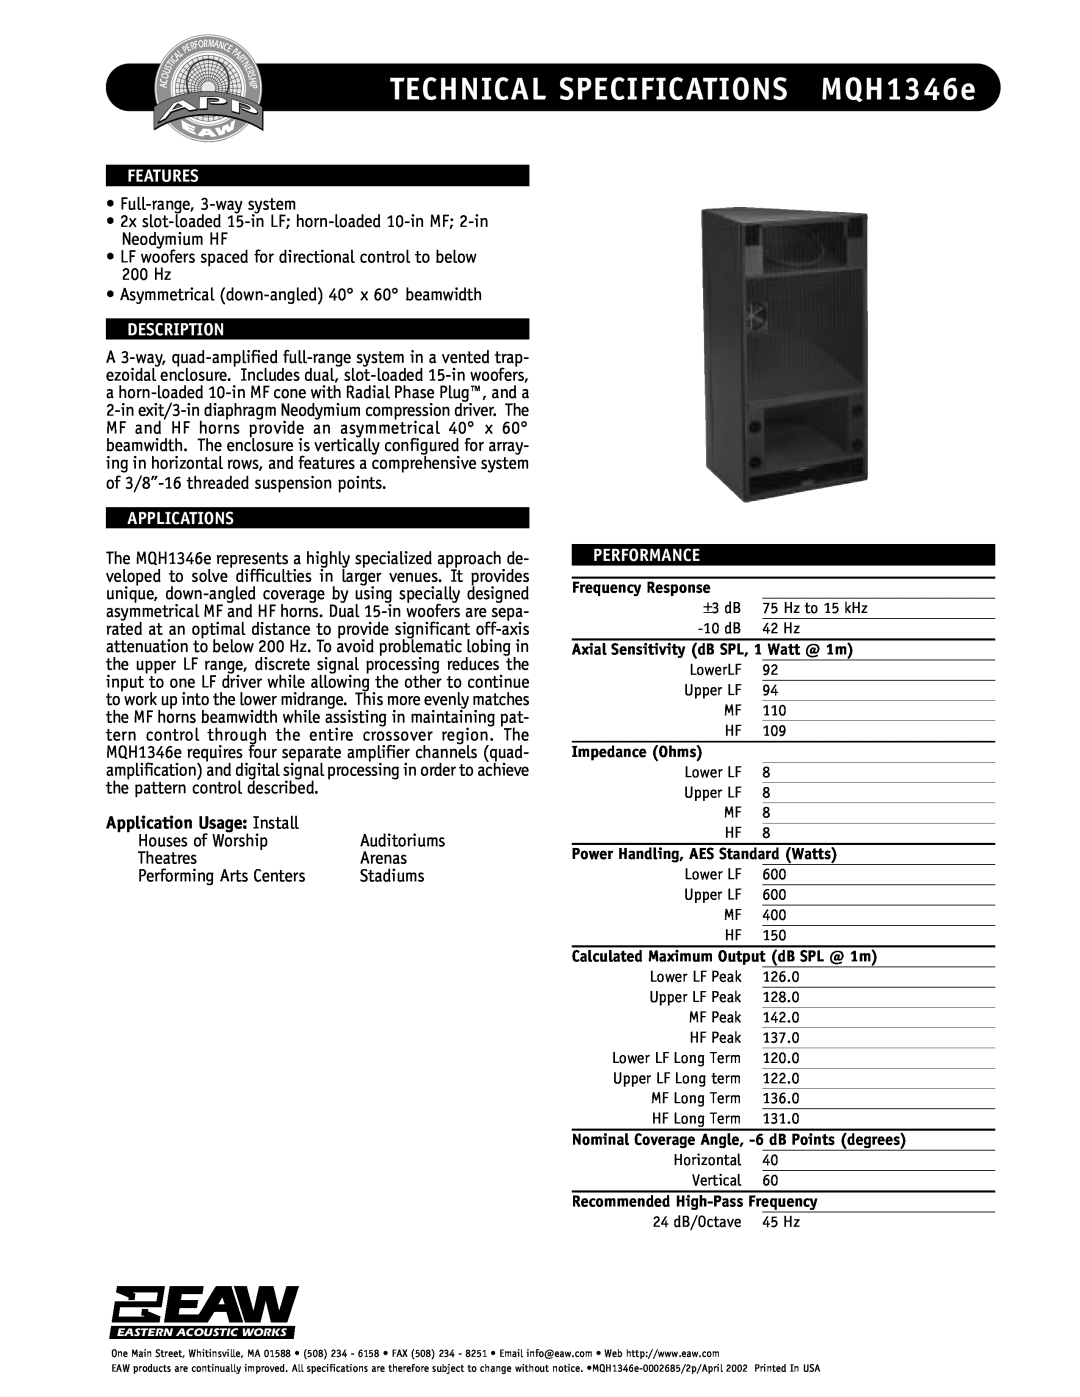 EAW technical specifications TECHNICAL SPECIFICATIONS MQH1346e, Features, Full-range, 3-waysystem, Description, Arenas 